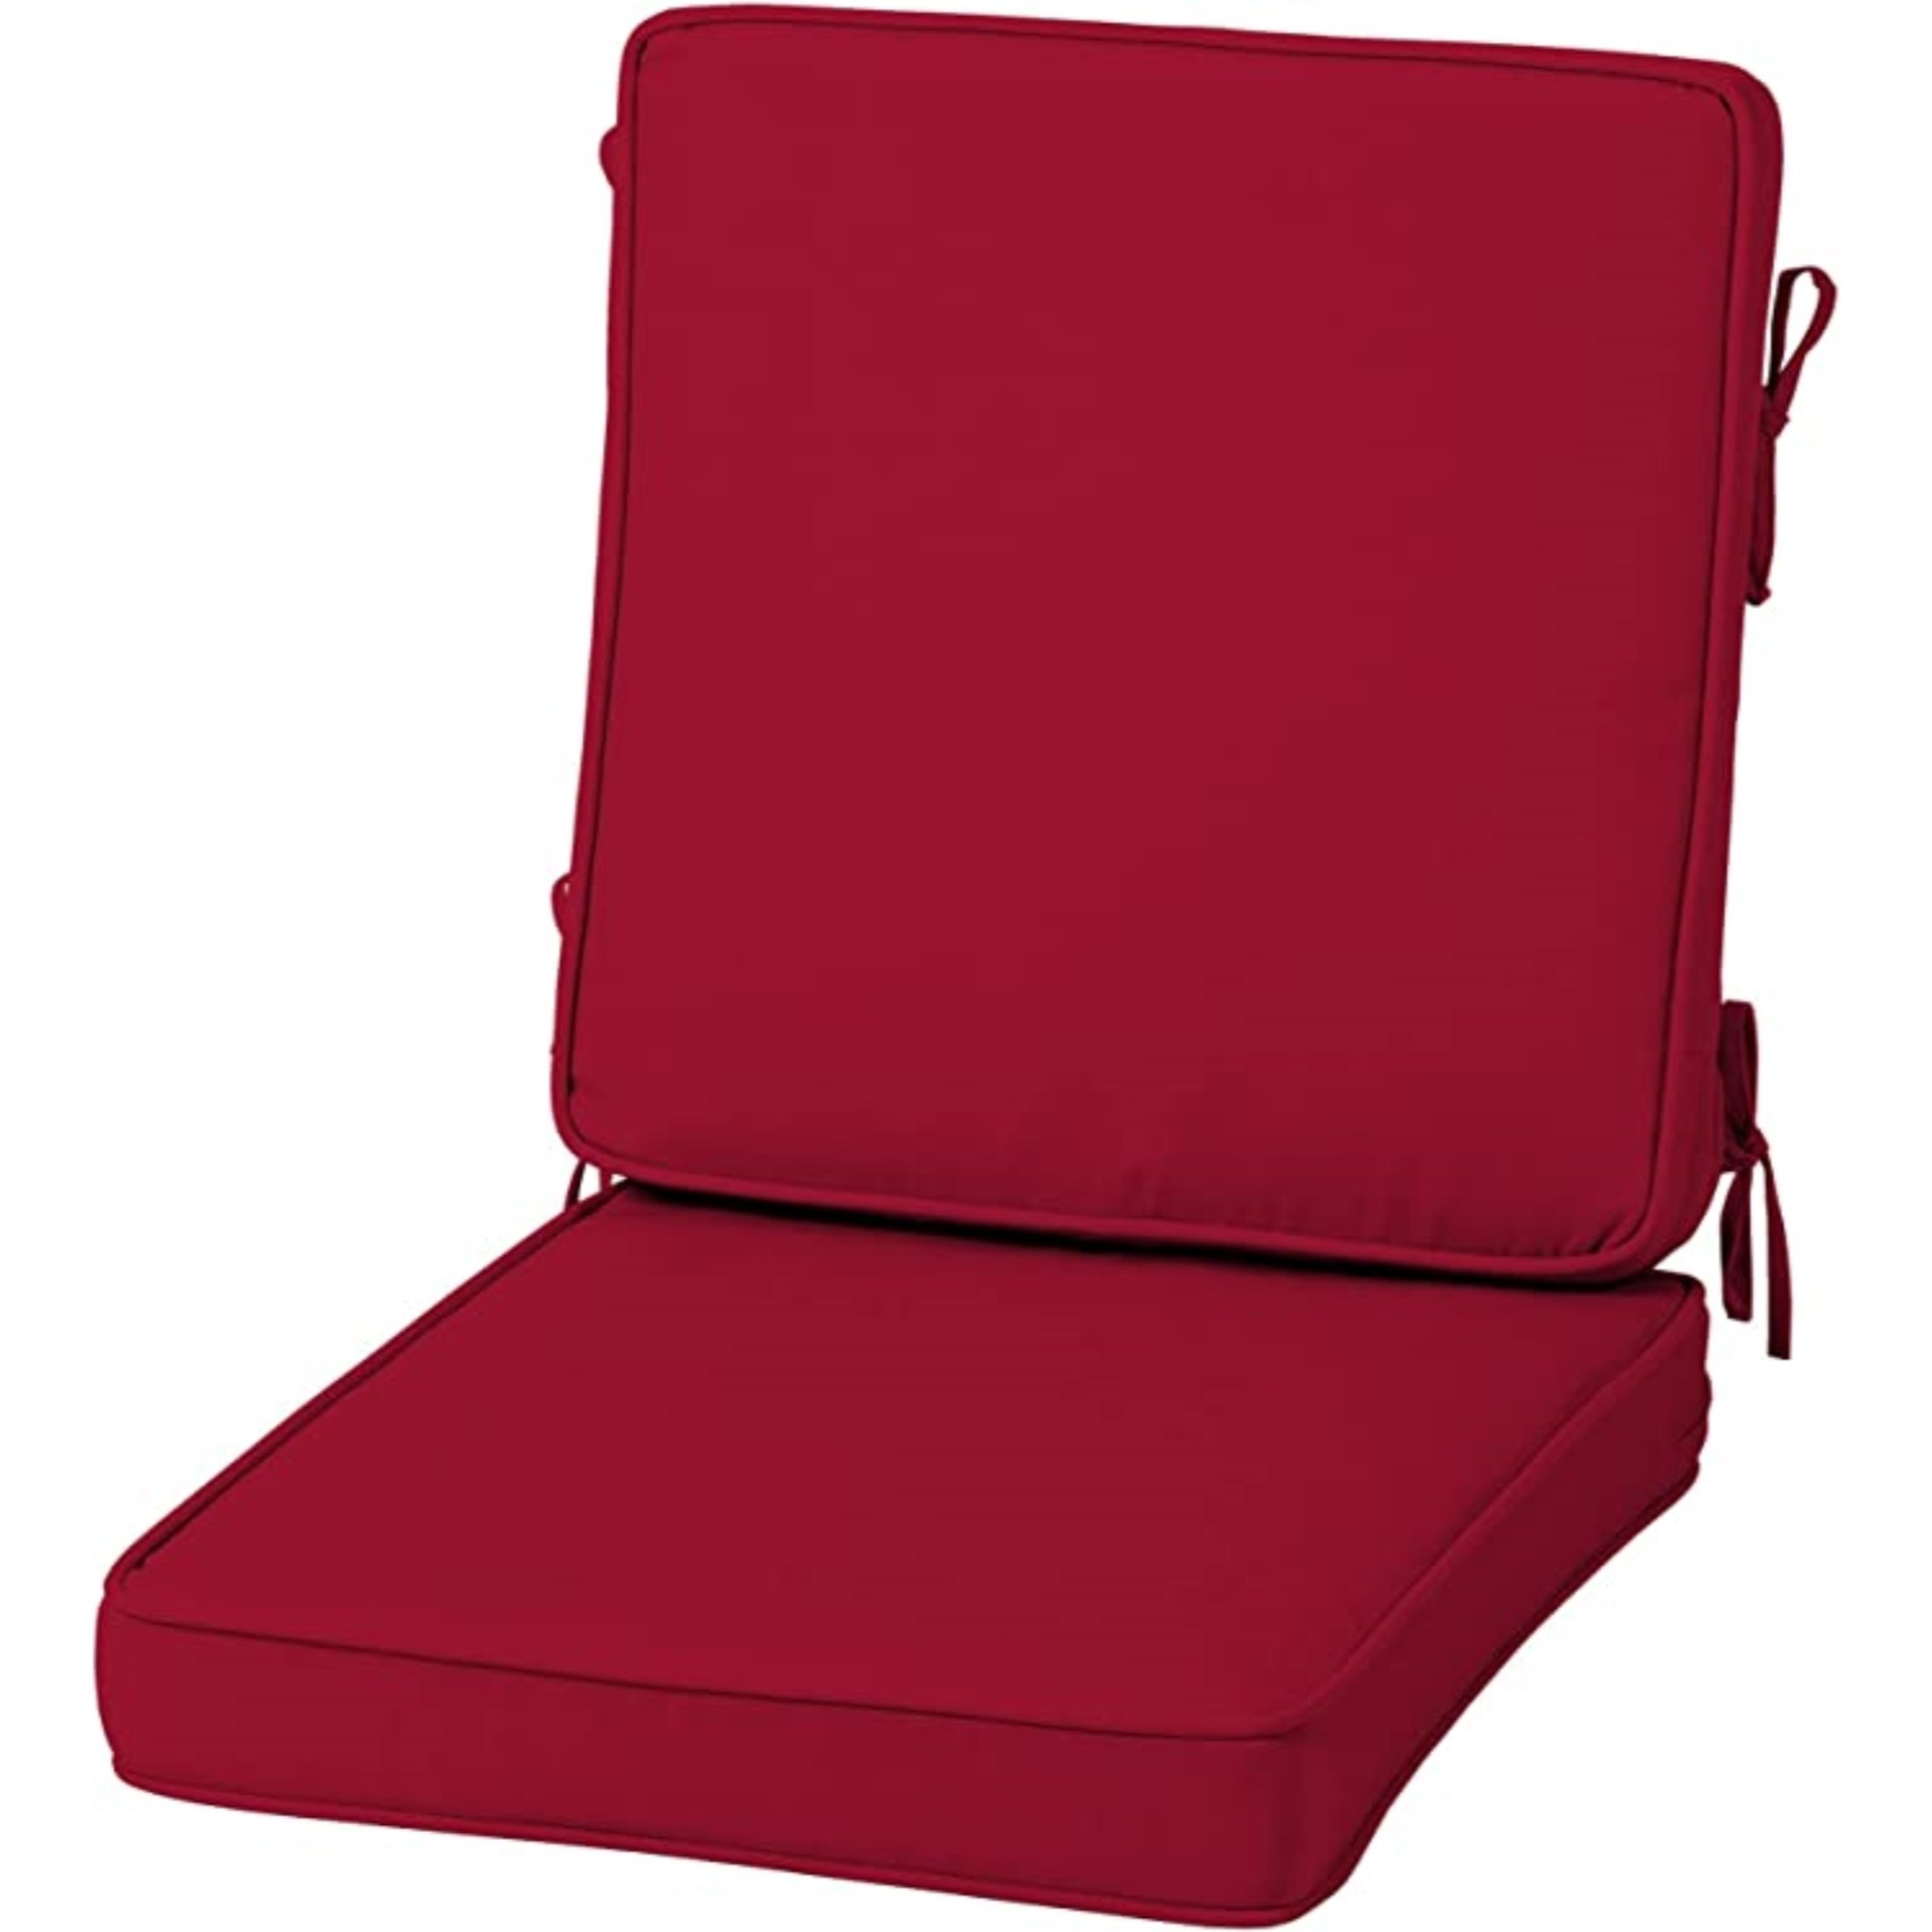 Arden Selections ProFoam 20 in. x 20 in. Caliente Red Outdoor High Back Chair Cushion